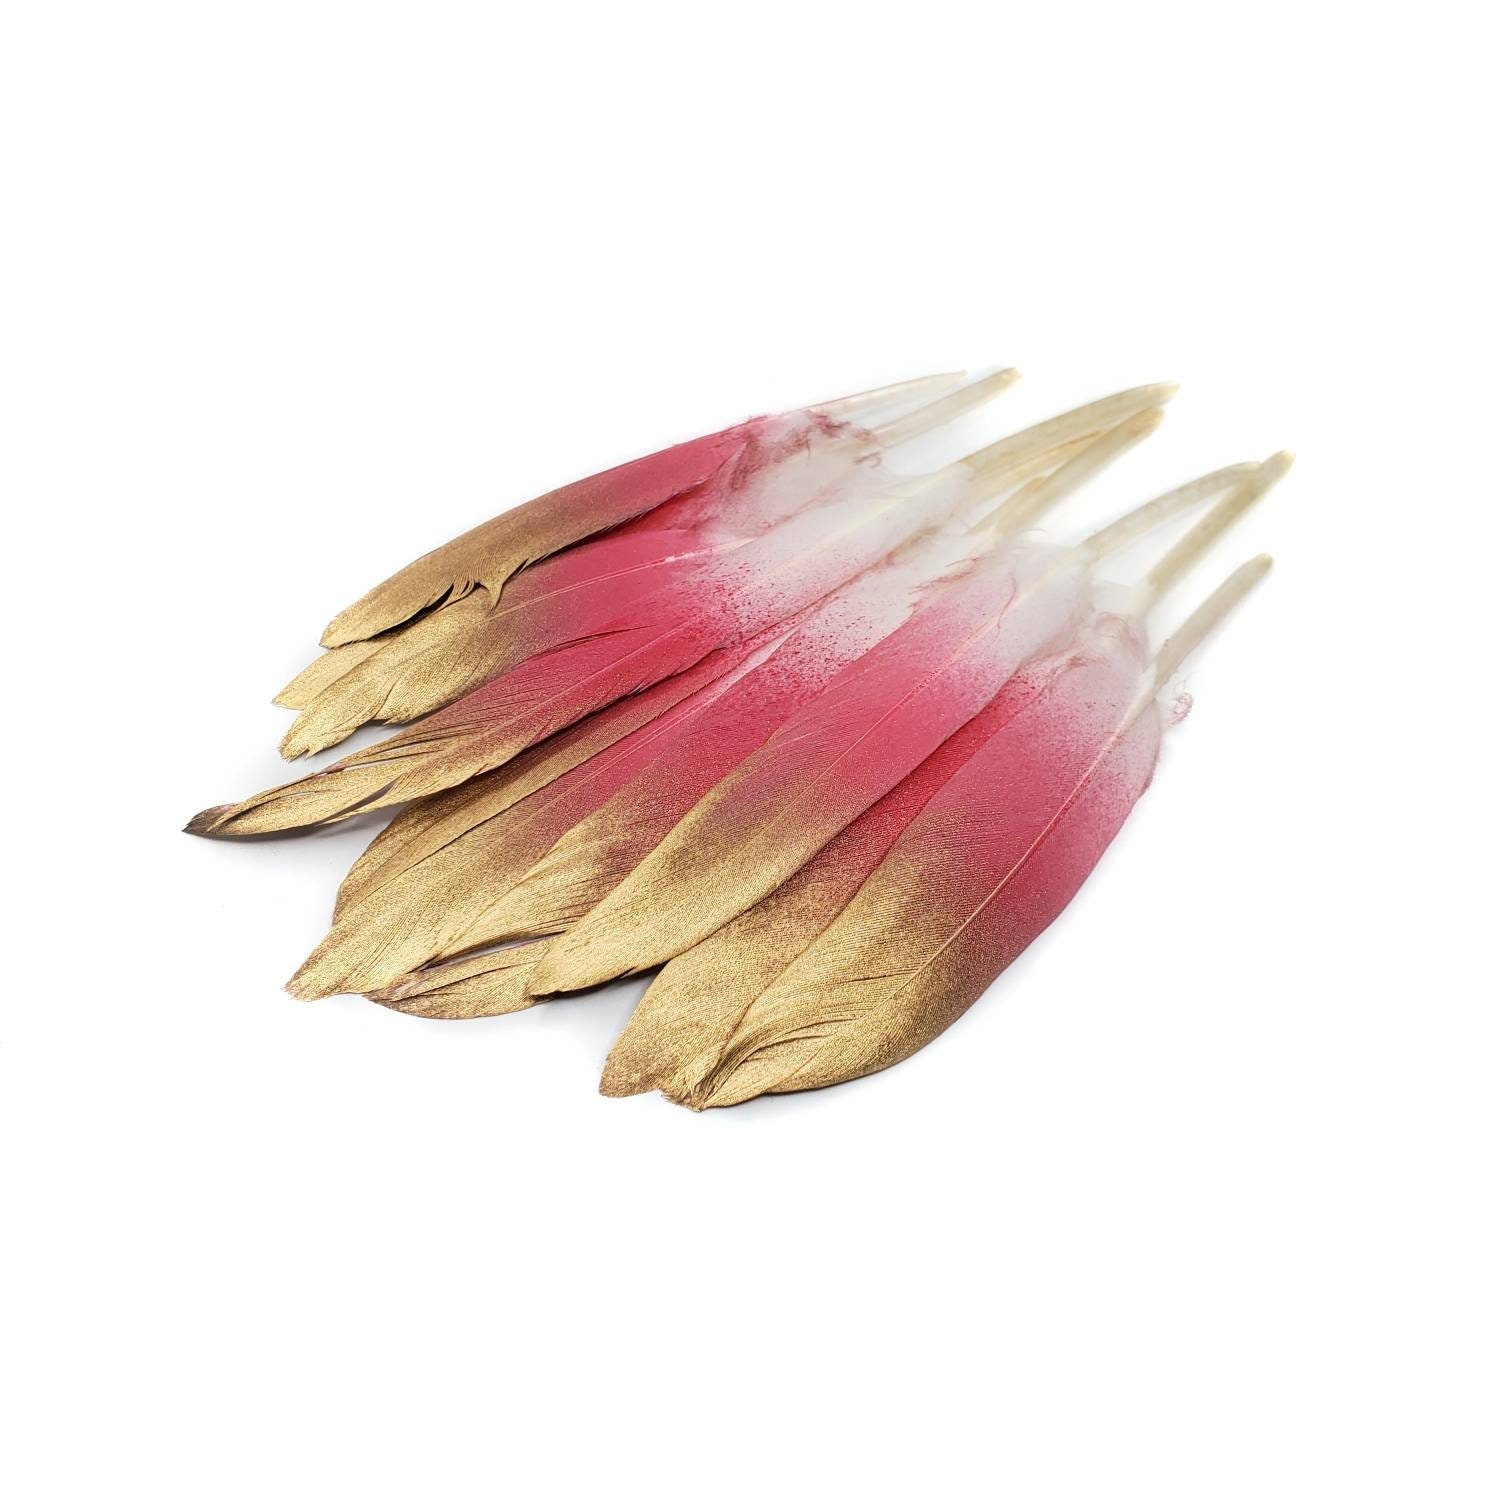 Assortment of Gold Tip Feathers, Pink Feathers, Black Feathers etc.